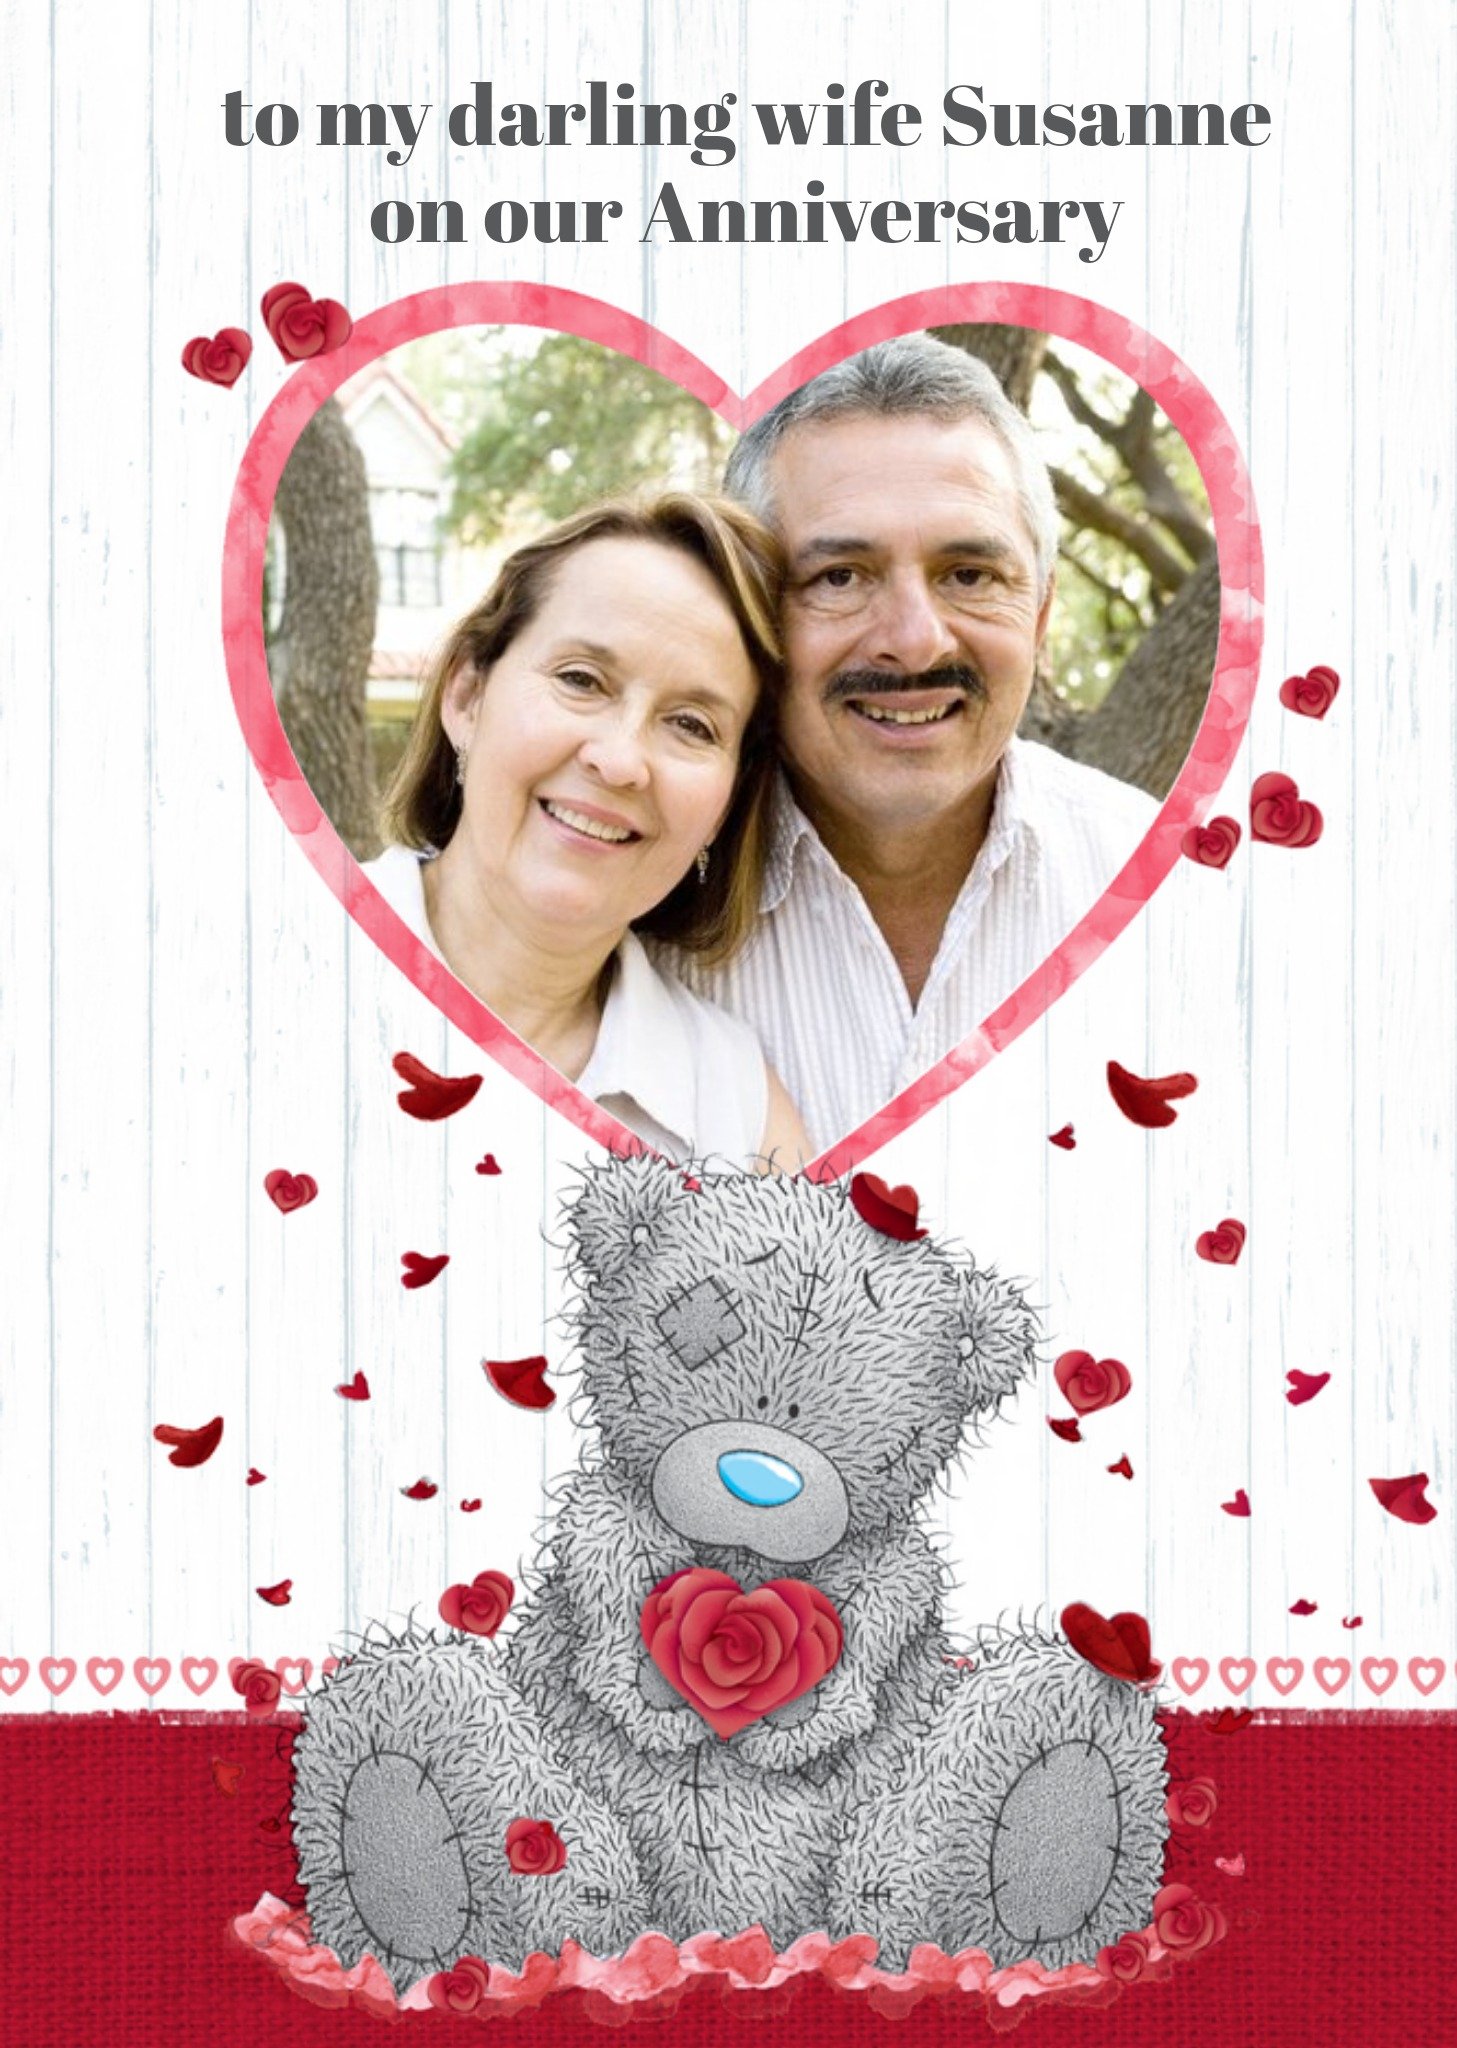 Me To You Tatty Teddy With Rose And Heart Frame Personalised Photo Upload Anniversary Card For Wife,